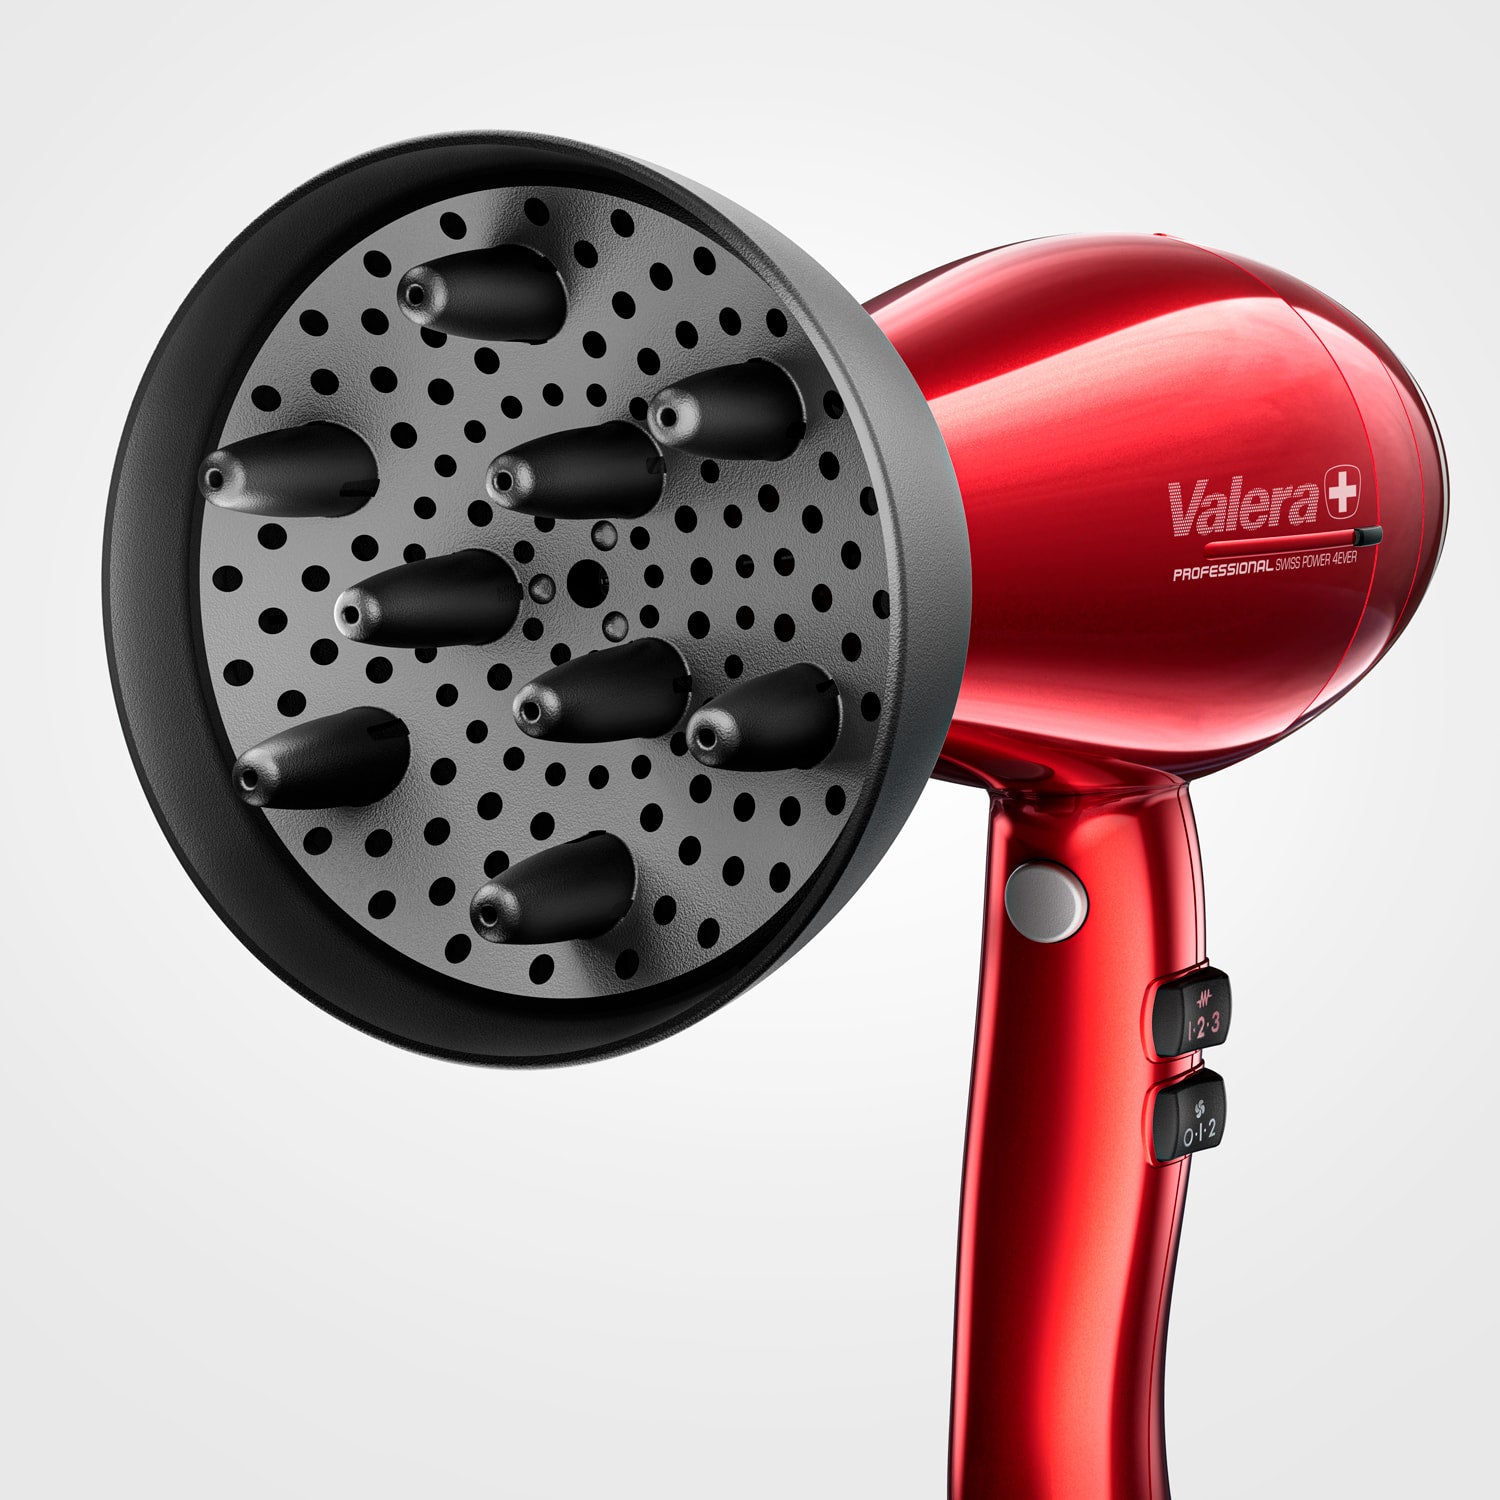  Swiss Power4ever professional hairdryer